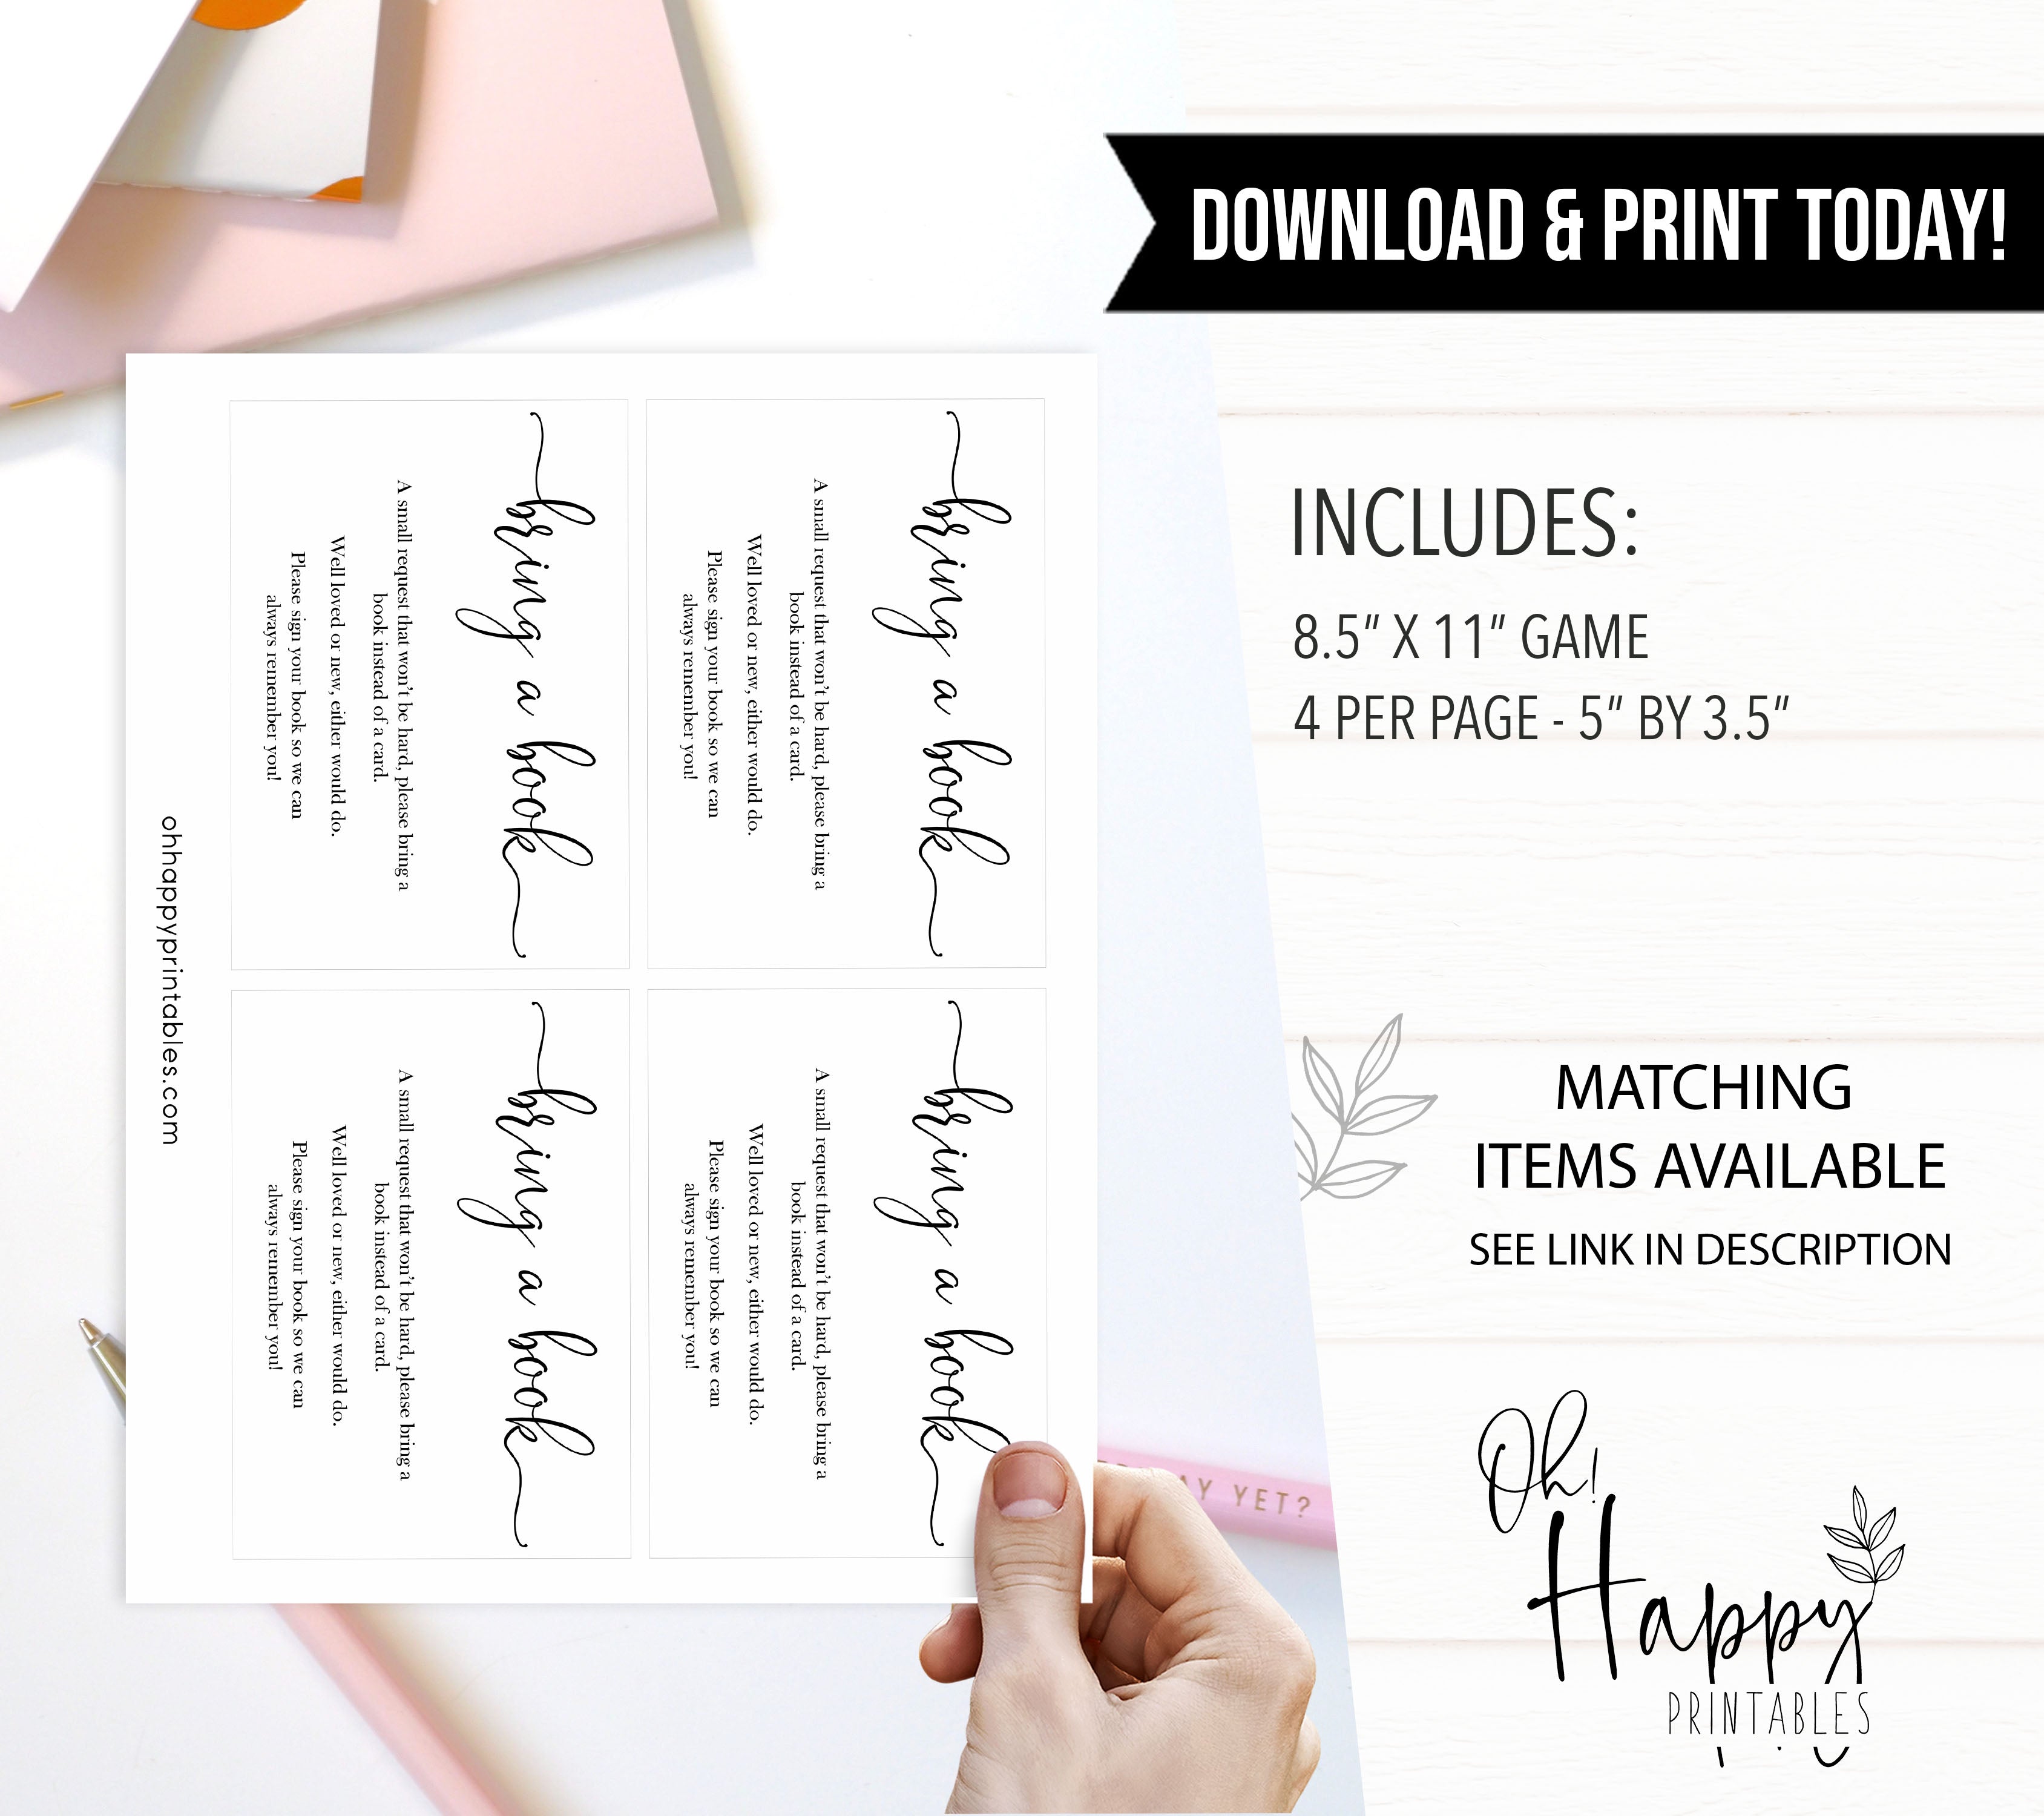 Minimalist baby shower games, bring a book baby games, 10 baby game bundles, fun baby games, printable baby games, top baby games, popular baby games, labor or porn games, neutral baby games, gender reveal games